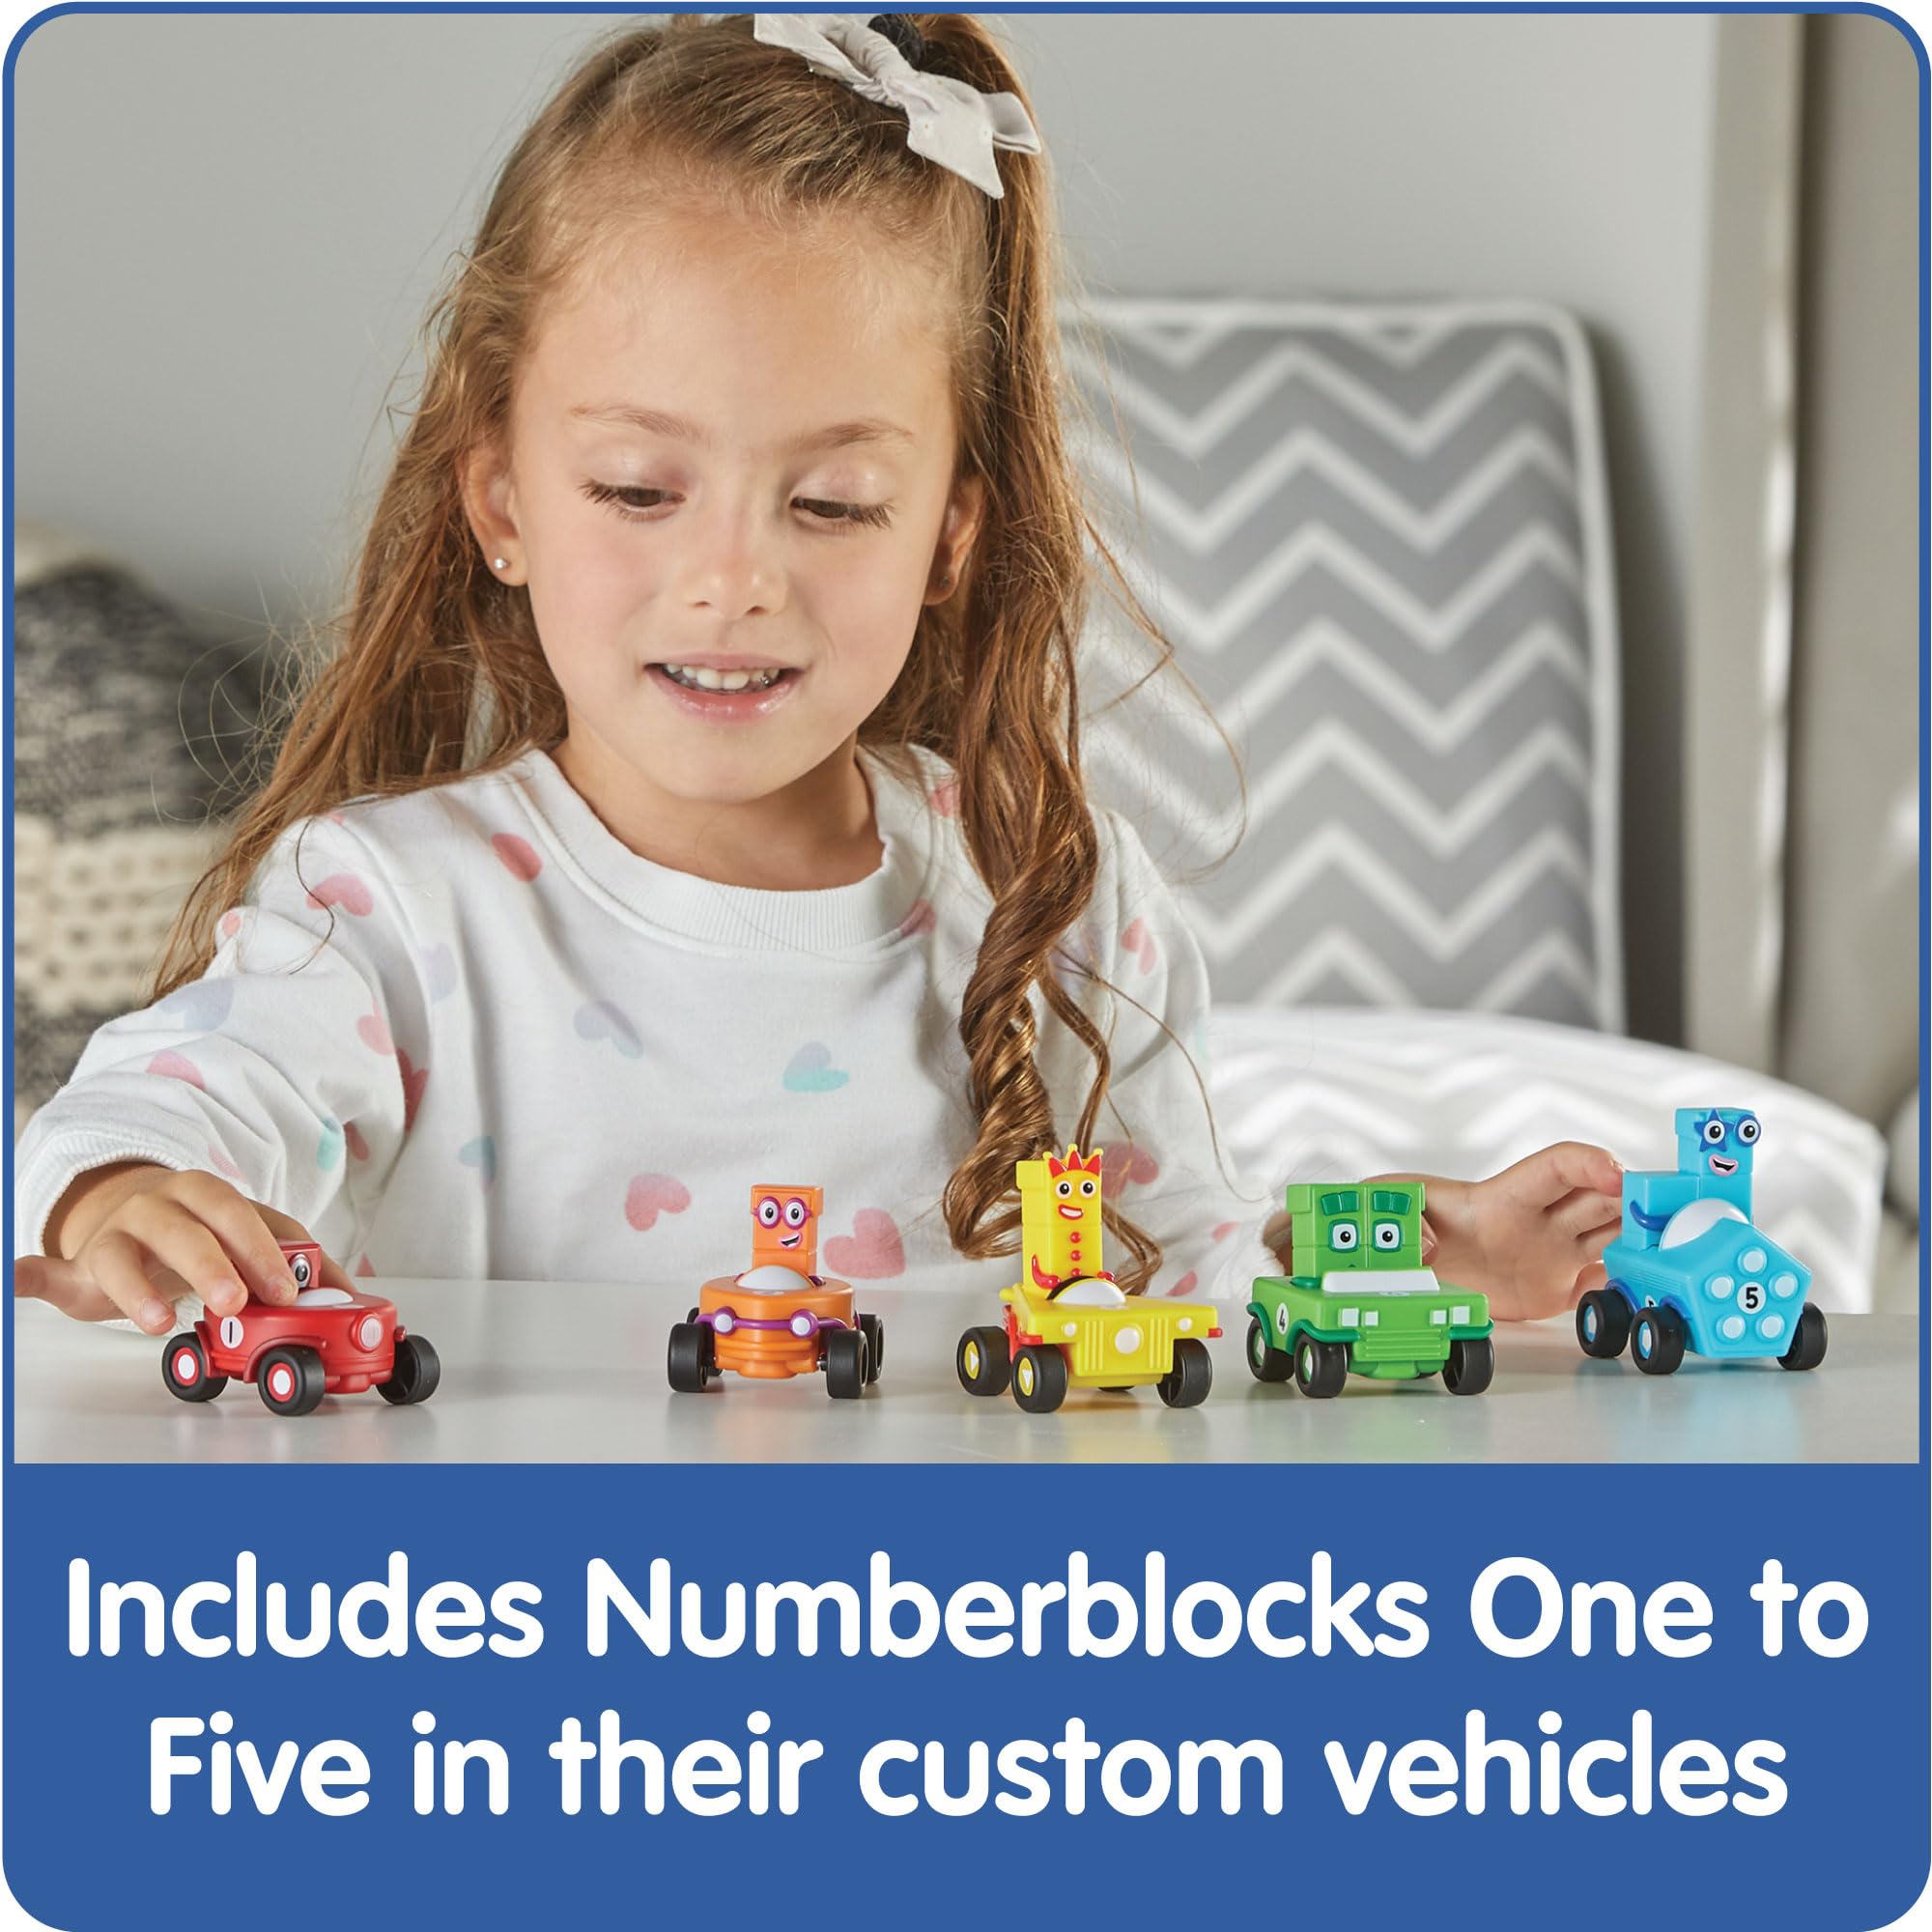 hand2mind Numberblocks Mini Vehicles, Toy Vehicle Playsets, Race Car Toy, Small Toy Cars, Cartoon Character Toys, Toddler Action Figures, Collectible Figures for Kids, Imaginative Play Toys